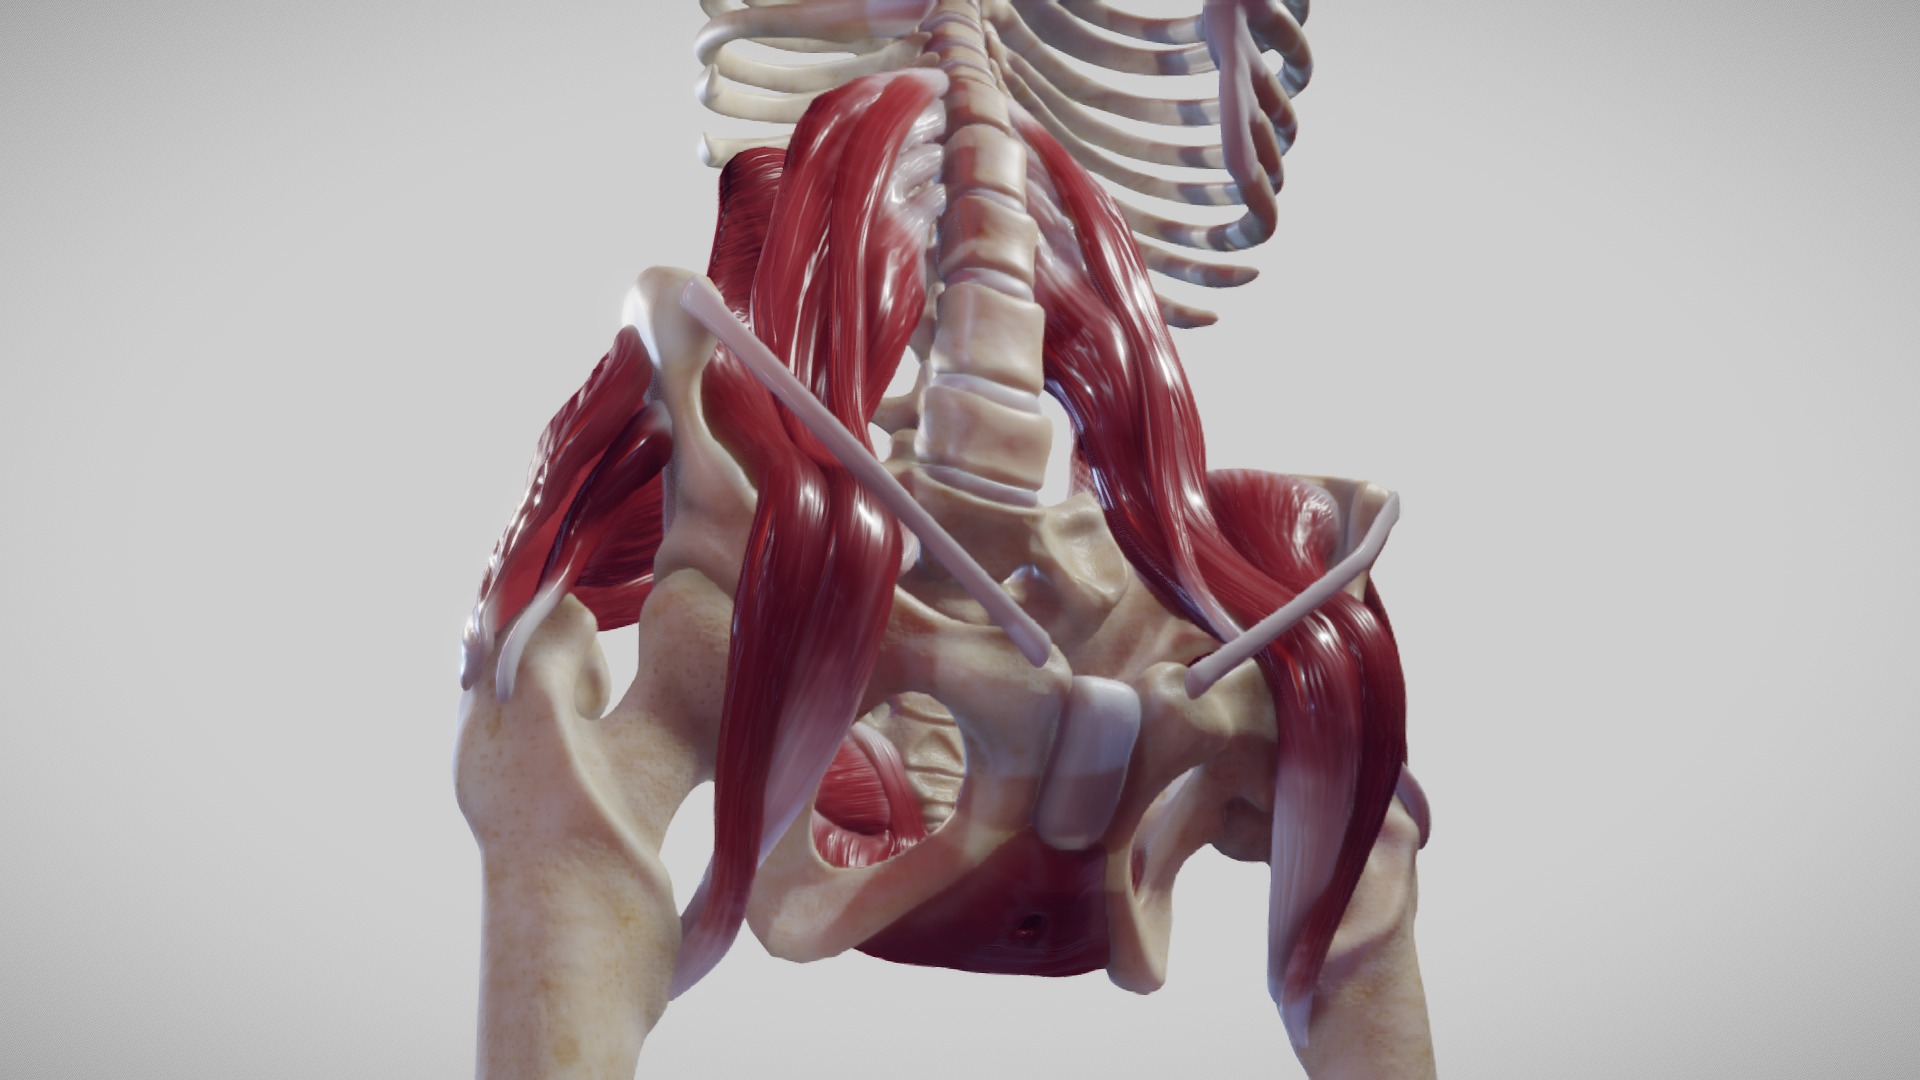 The Pelvic Floor And Post Abdominal Wall Muscles Buy Royalty Free 3d Model By Ebers B356aa5